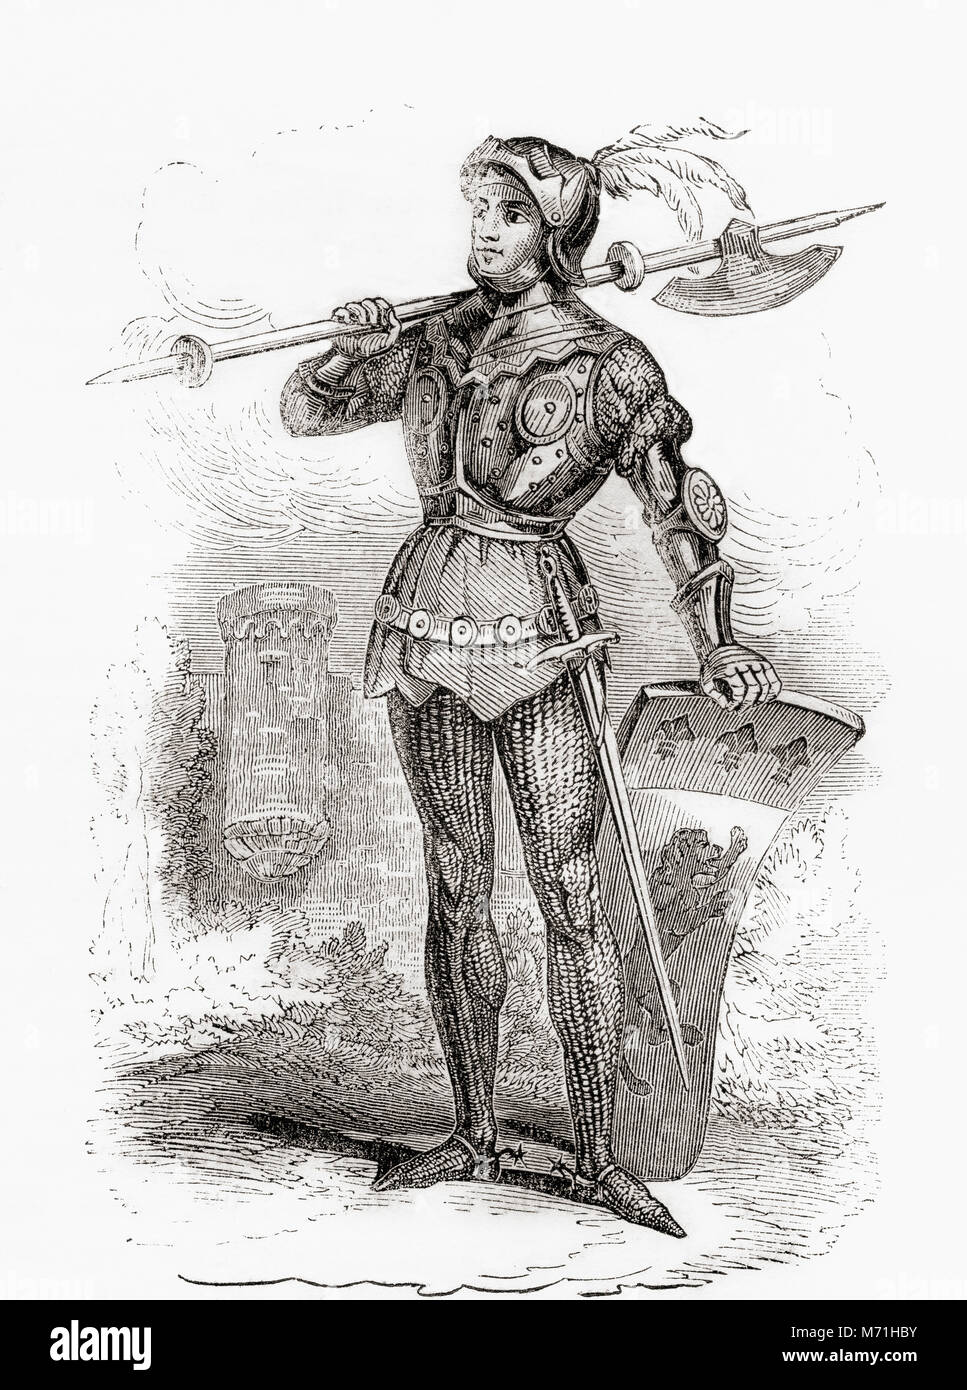 Bertrand du Guesclin in full armour.  Bertrand du Guesclin,c. 1320 –1380, aka The Eagle of Brittany or The Black Dog of Brocéliande.  Breton knight, French military commander during the Hundred Years' War and Constable of France.  From Old England: A Pictorial Museum, published 1847. Stock Photo